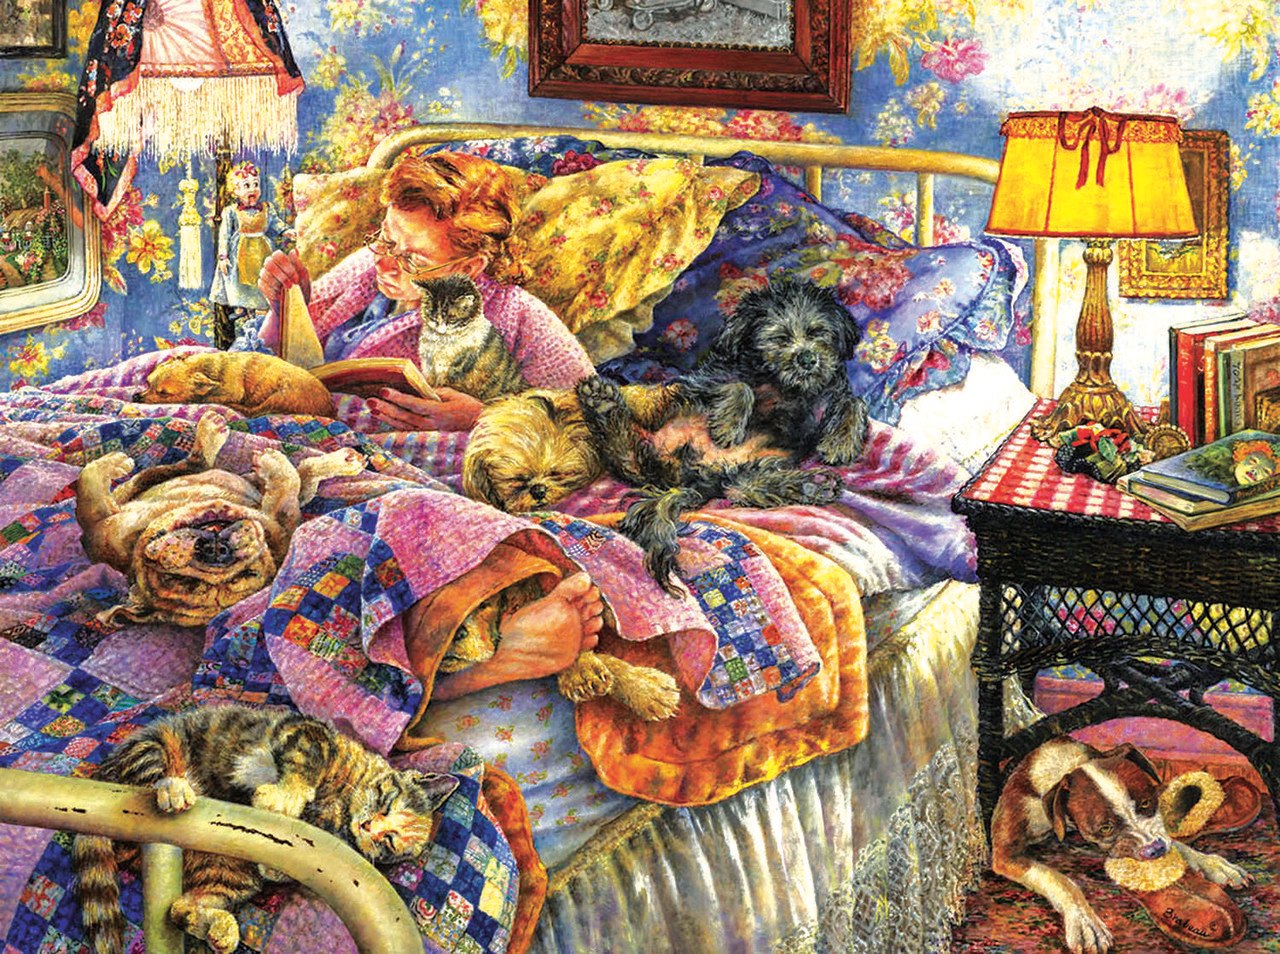 Pet Bed - 1000pc Jigsaw Puzzle by Sunsout  			  					NEW